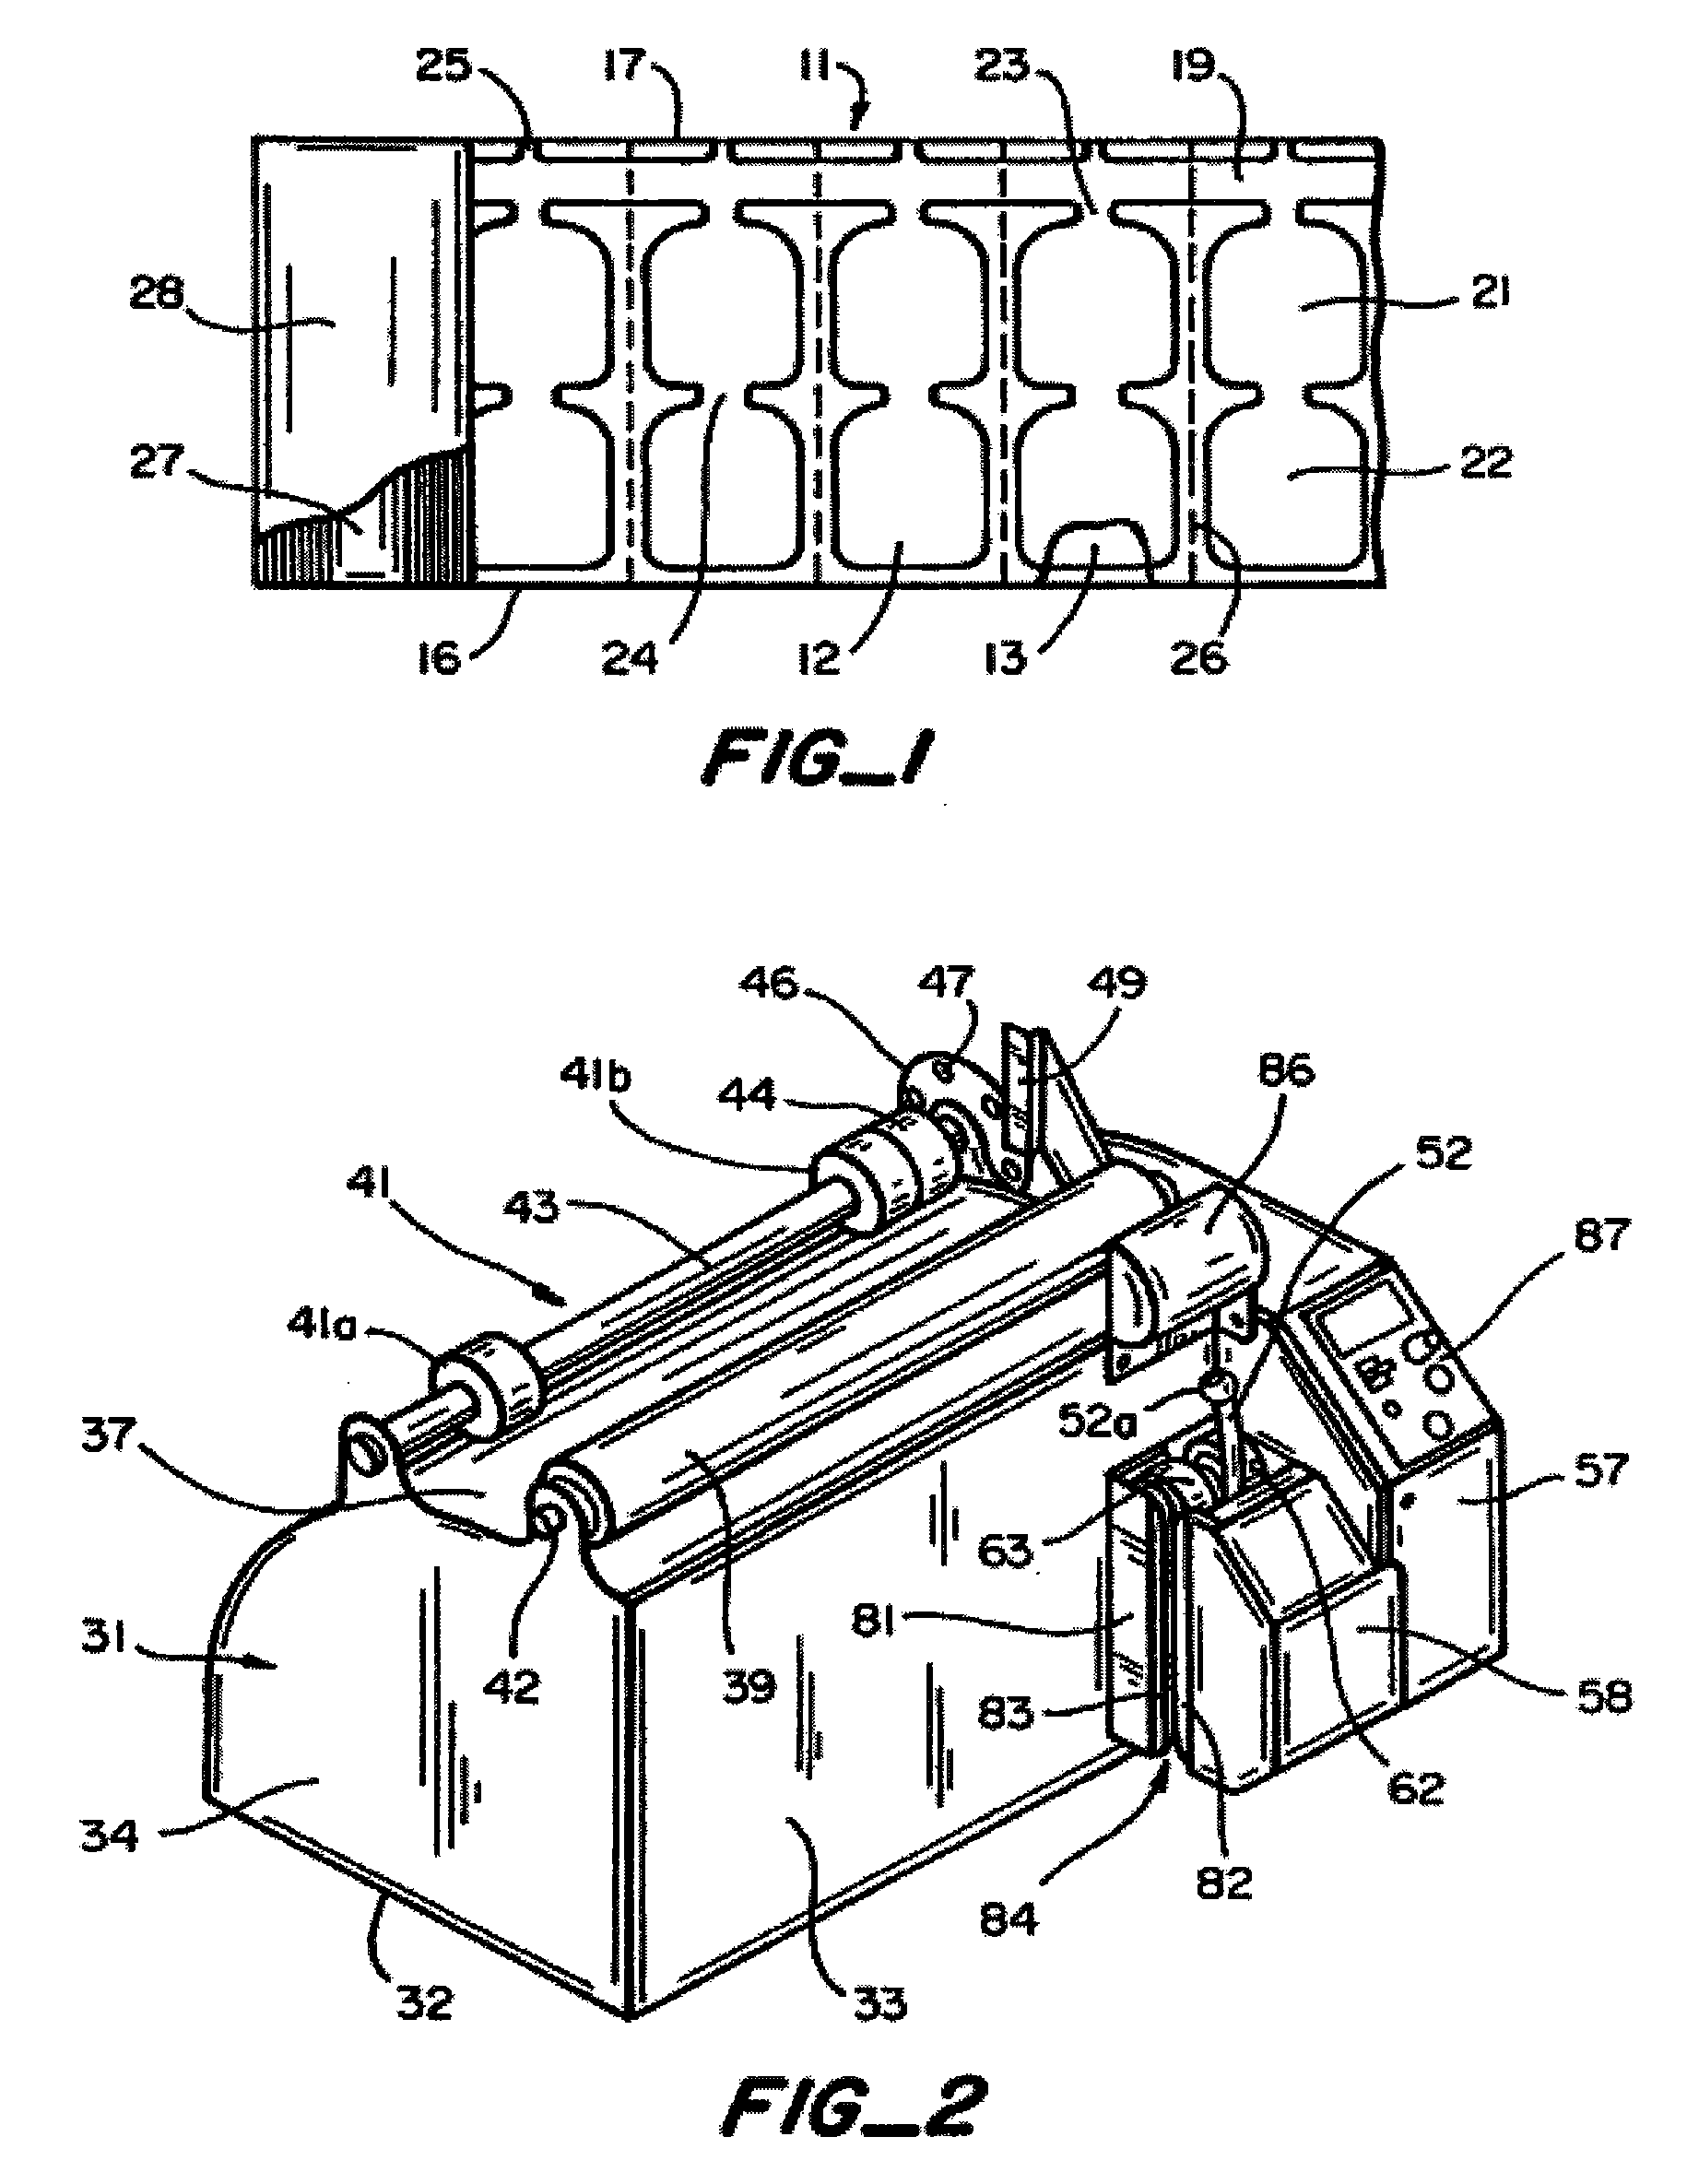 Method And Apparatus For Inflating And Sealing Packing Cushions Employing Film Recognition Controller